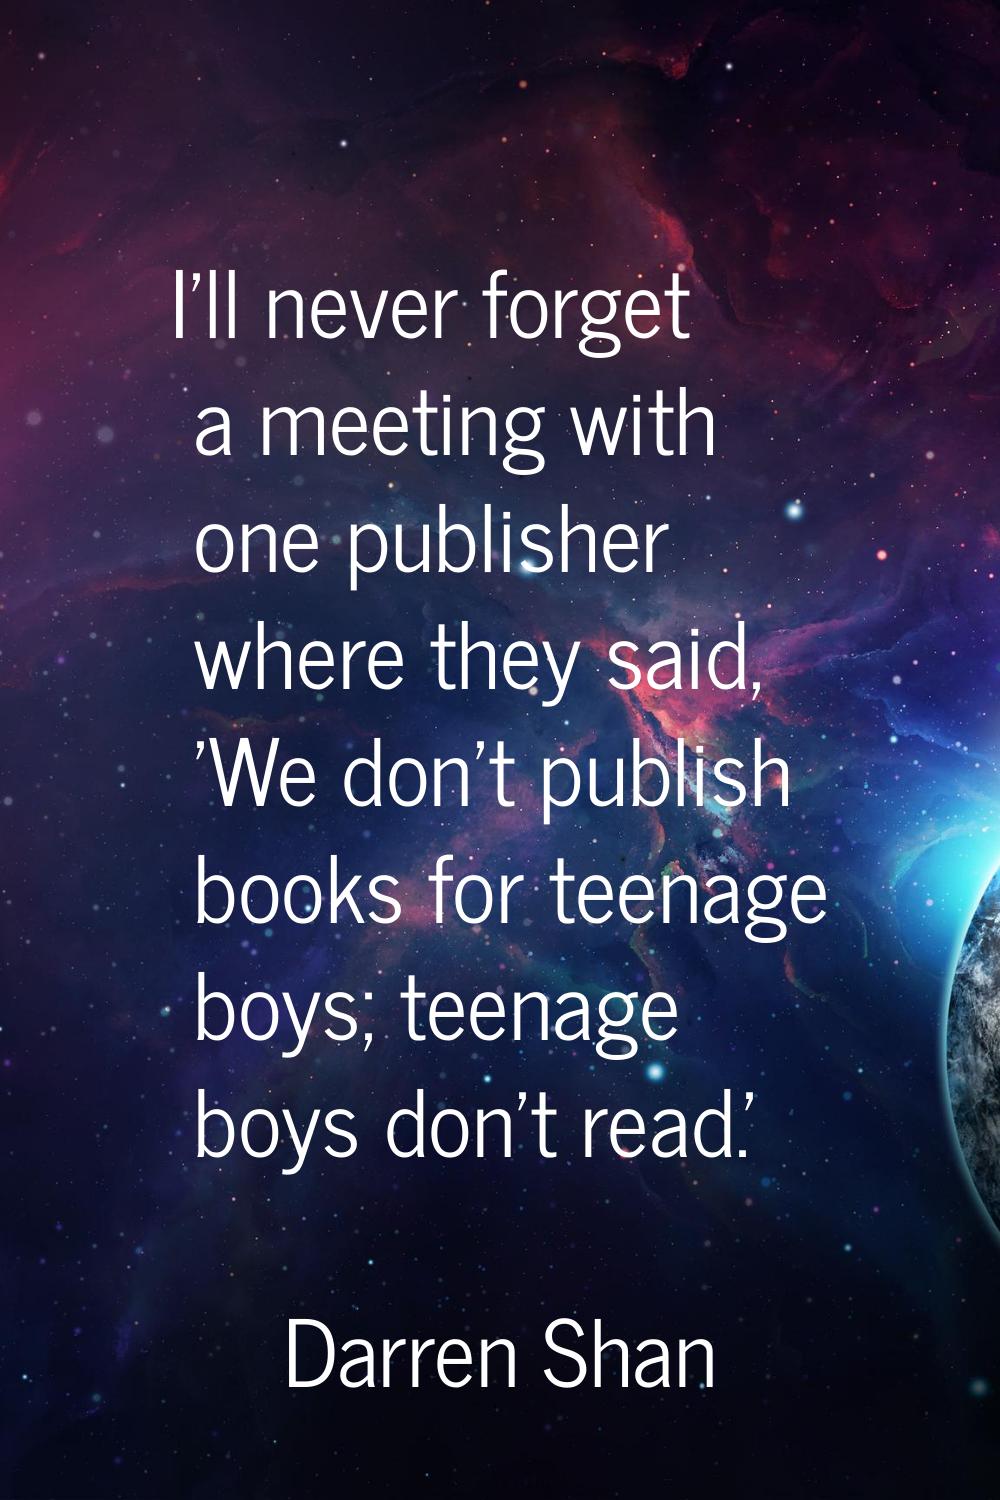 I'll never forget a meeting with one publisher where they said, 'We don't publish books for teenage